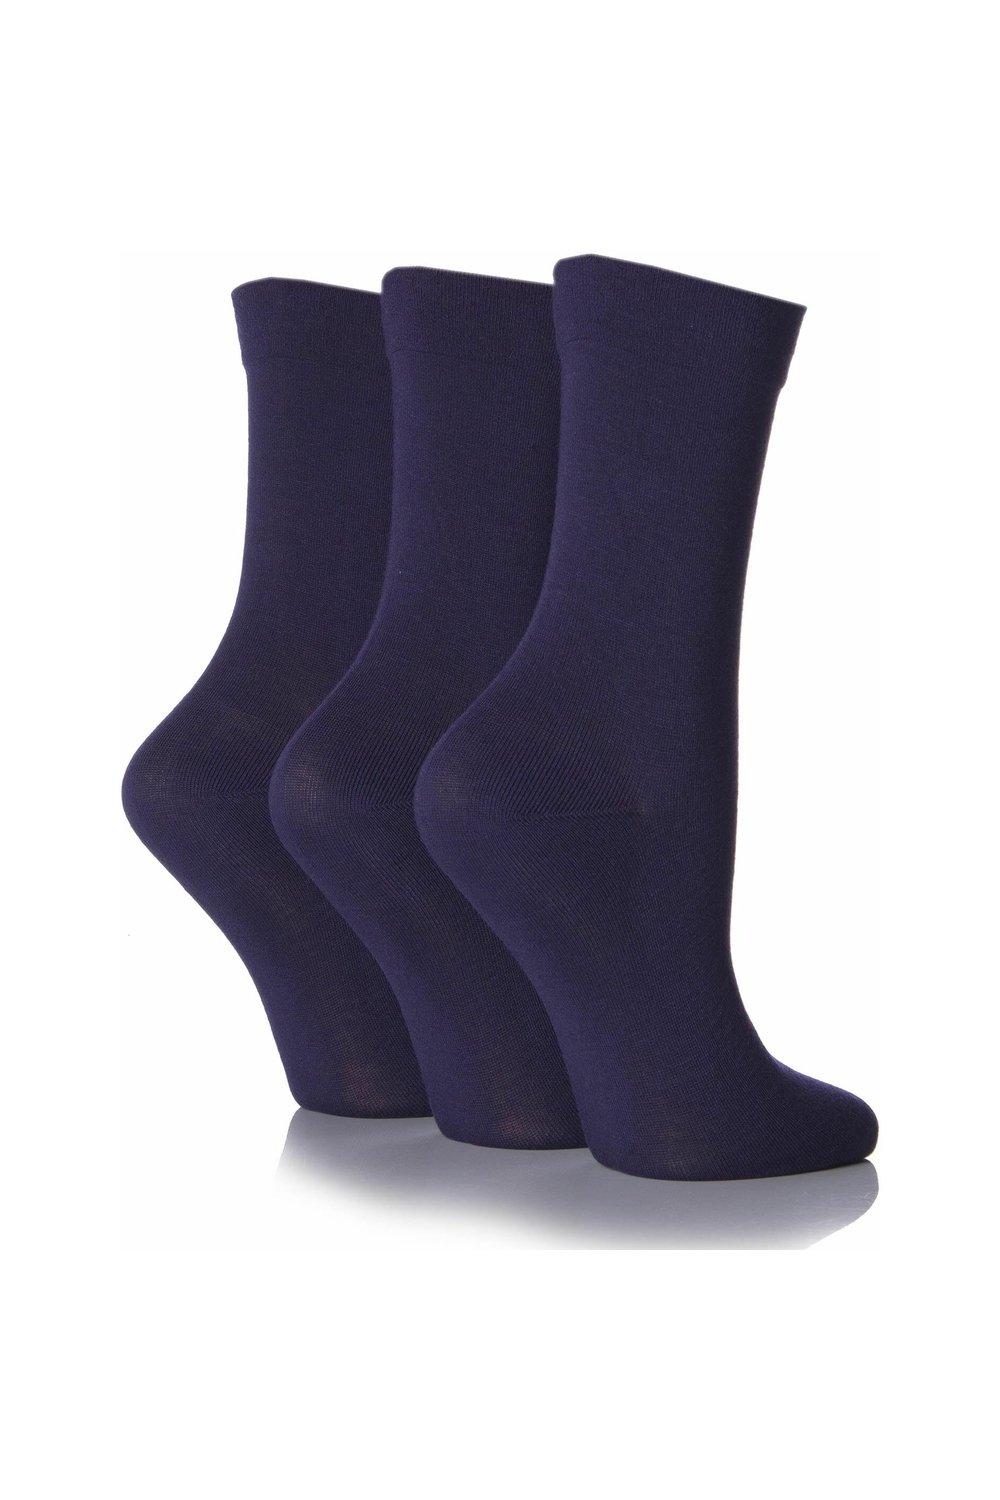 3 Pair Gentle Bamboo Socks with Smooth Toe Seams in Plains and Stripes